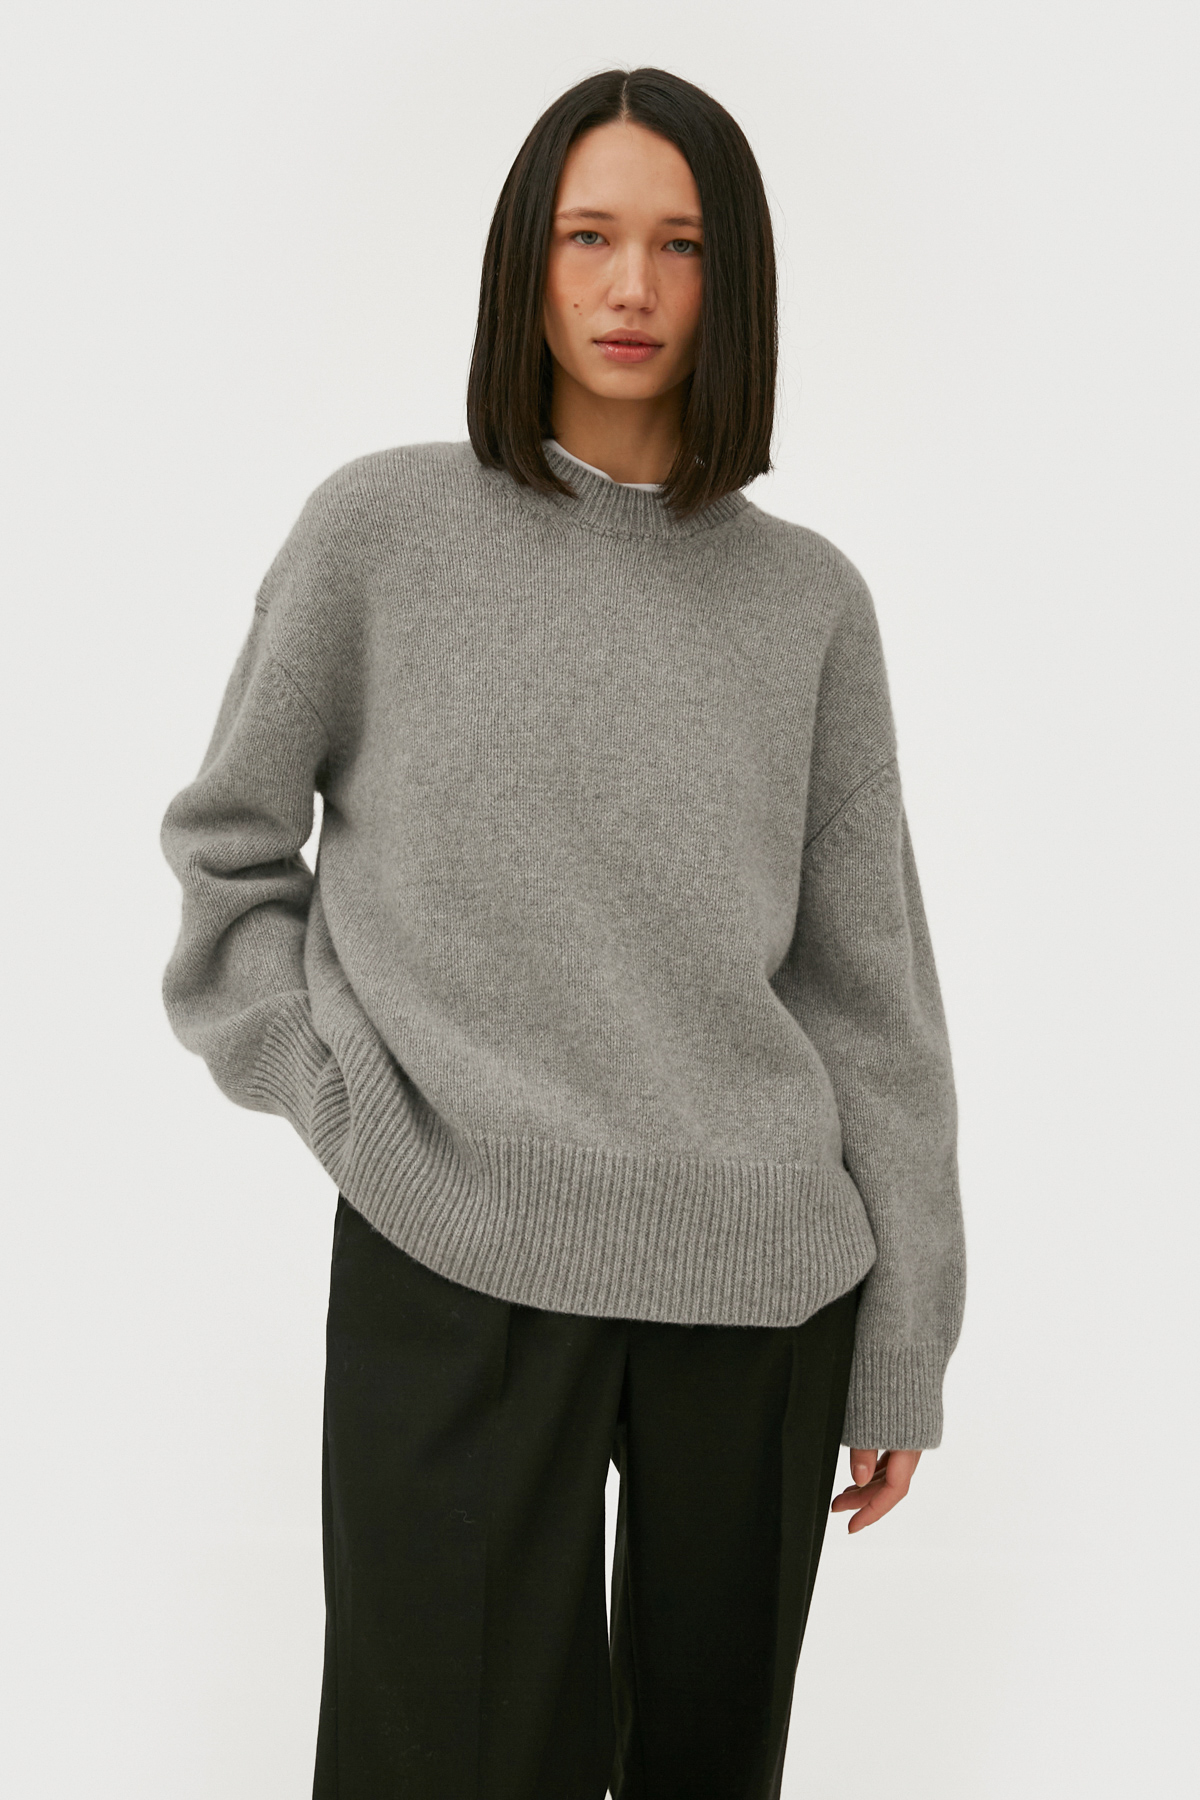 Cashmere grey loose-fit sweater, photo 1